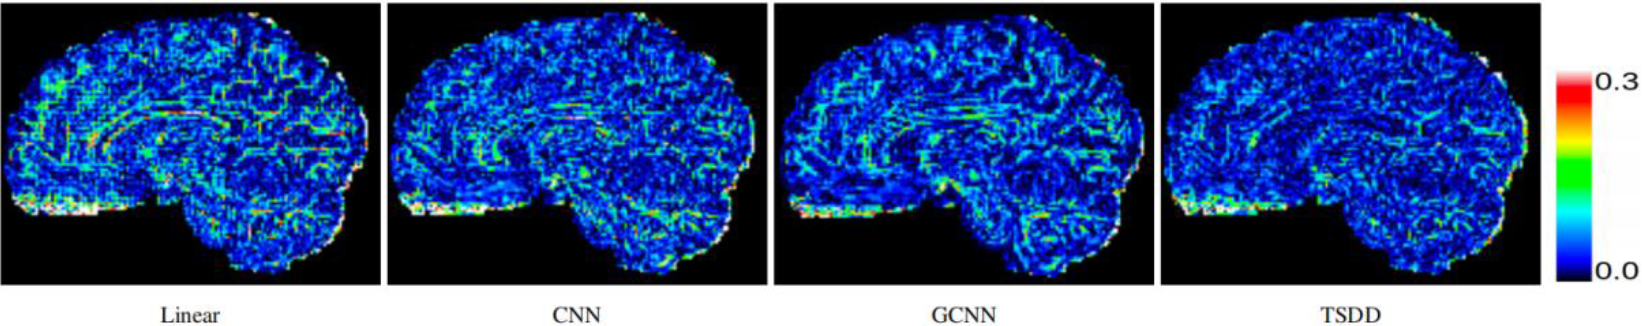 Comparison of error maps of derived FA from reconstructed DWI scans.